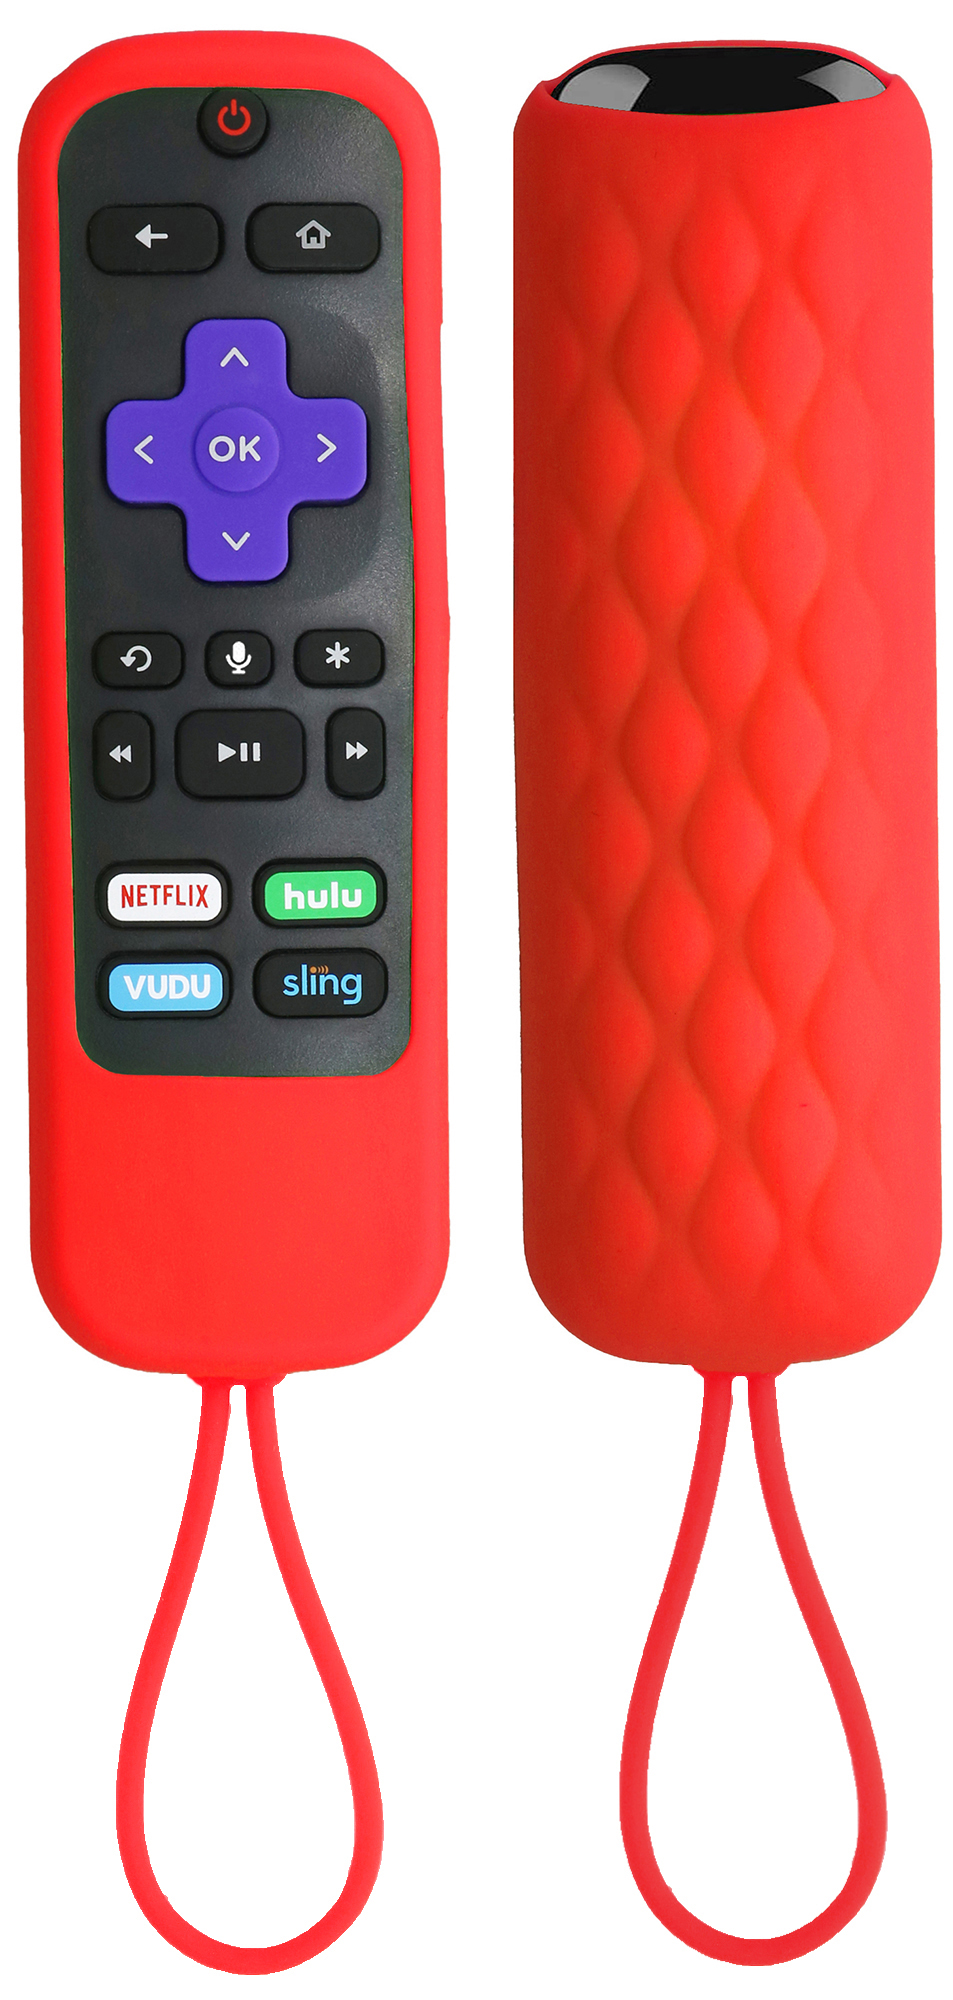 TOKERSE Cover for TCL Roku TV Steaming Stick 3600R/3800/3900 Remote - Silicone Case Cover for TCL Roku TV Steaming Stick/Voice/Express/Premiere Remote Controller Replacement Skin Sleeve - Red